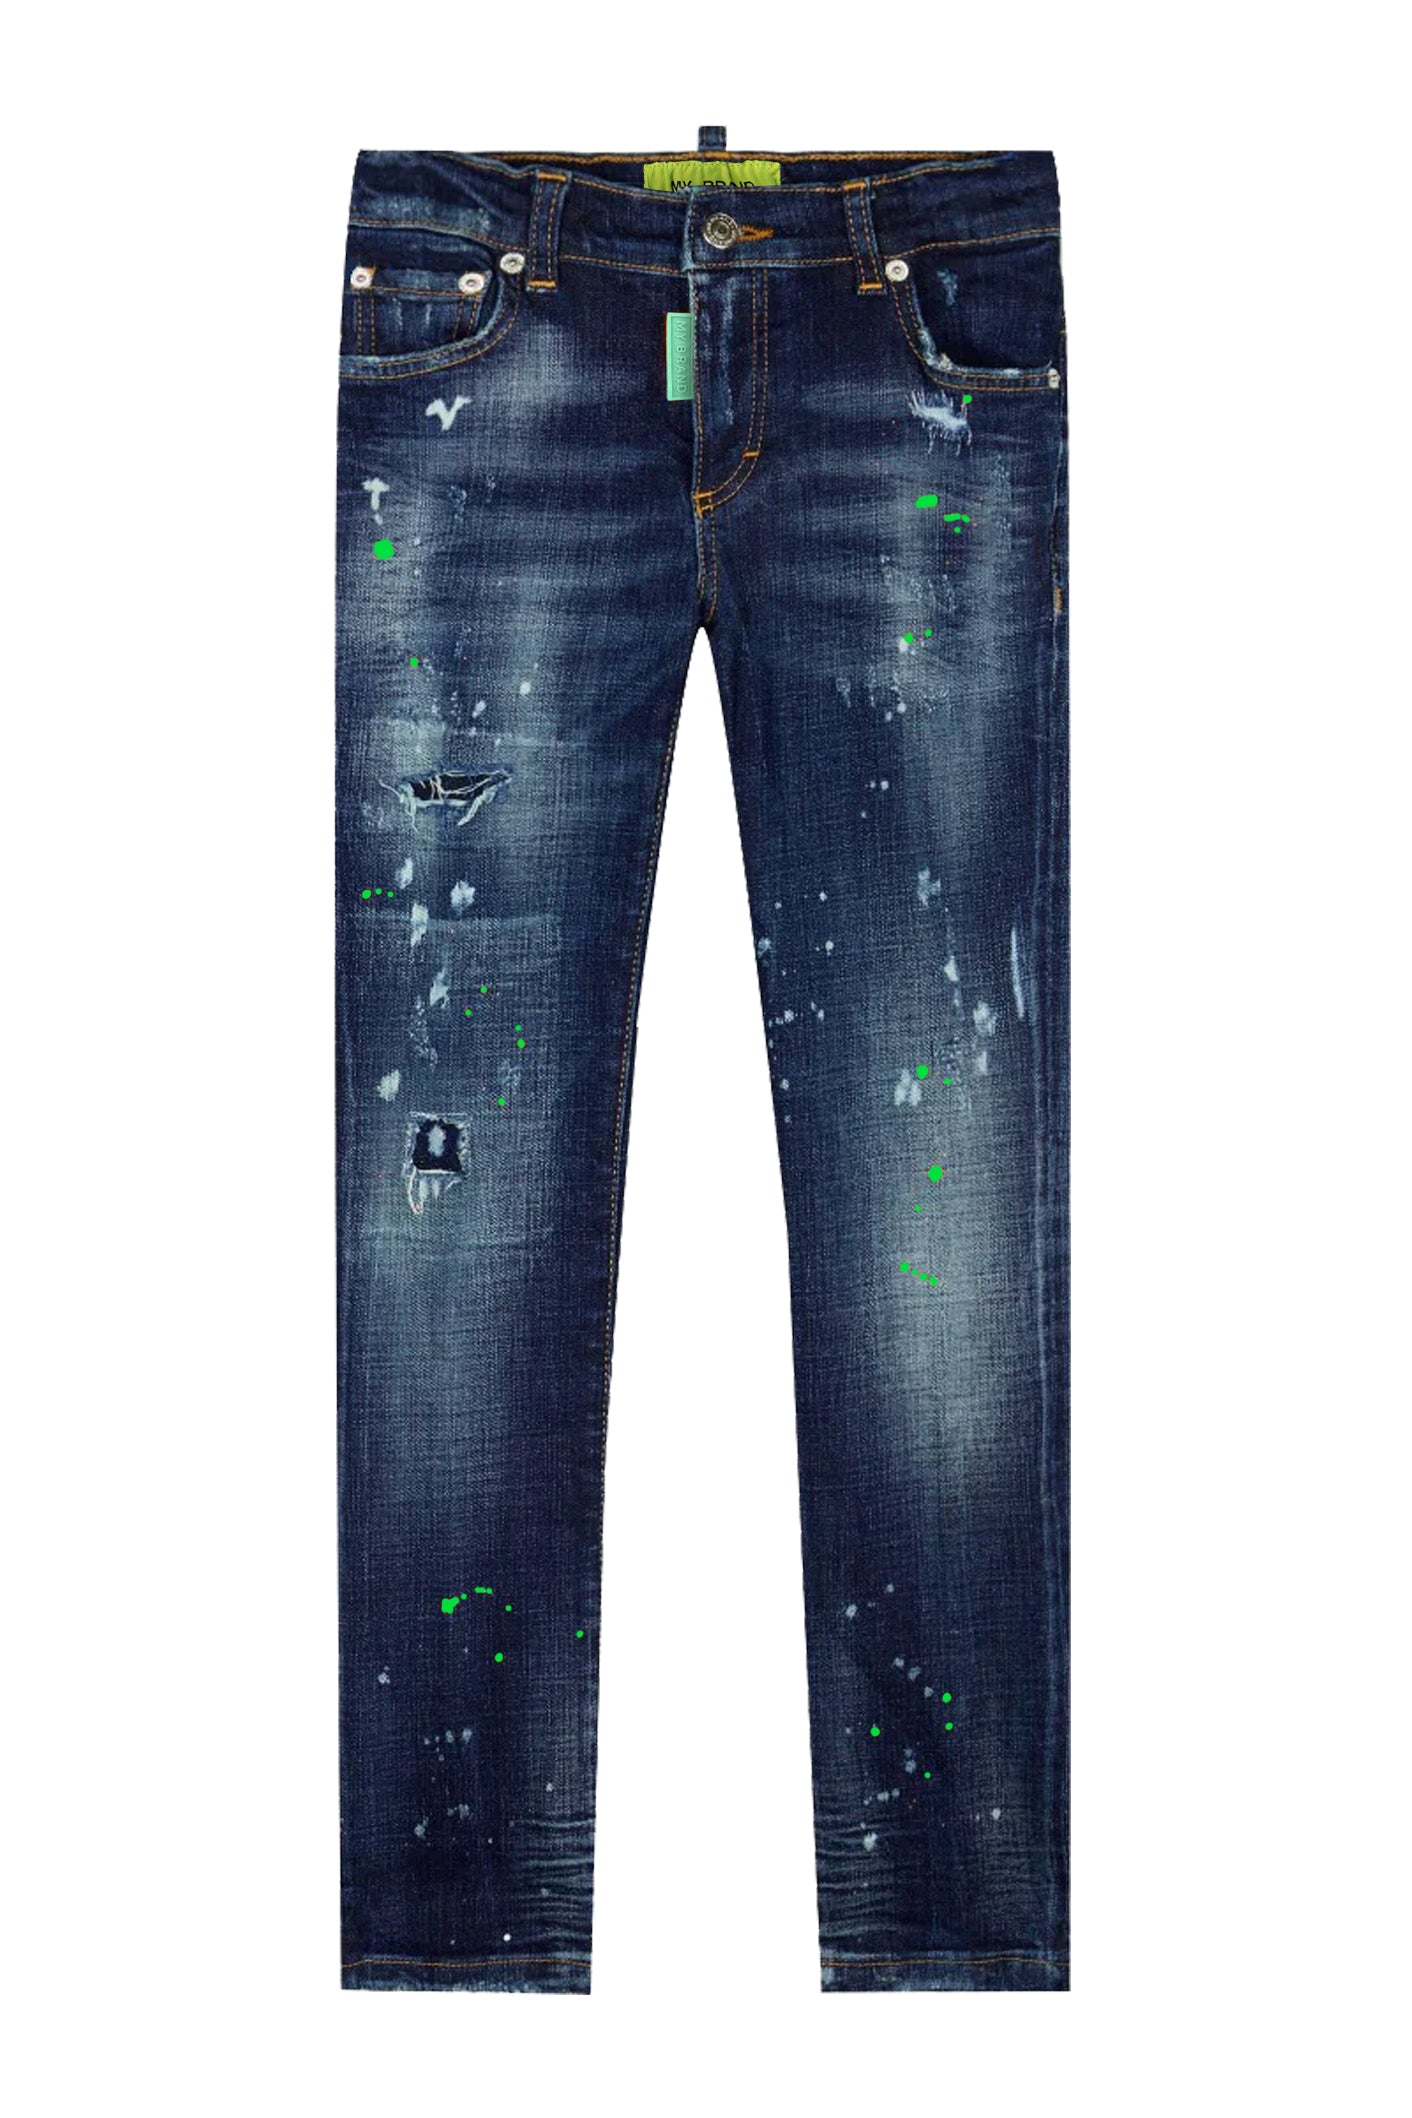 Blue Distressed Neon Green Jeans